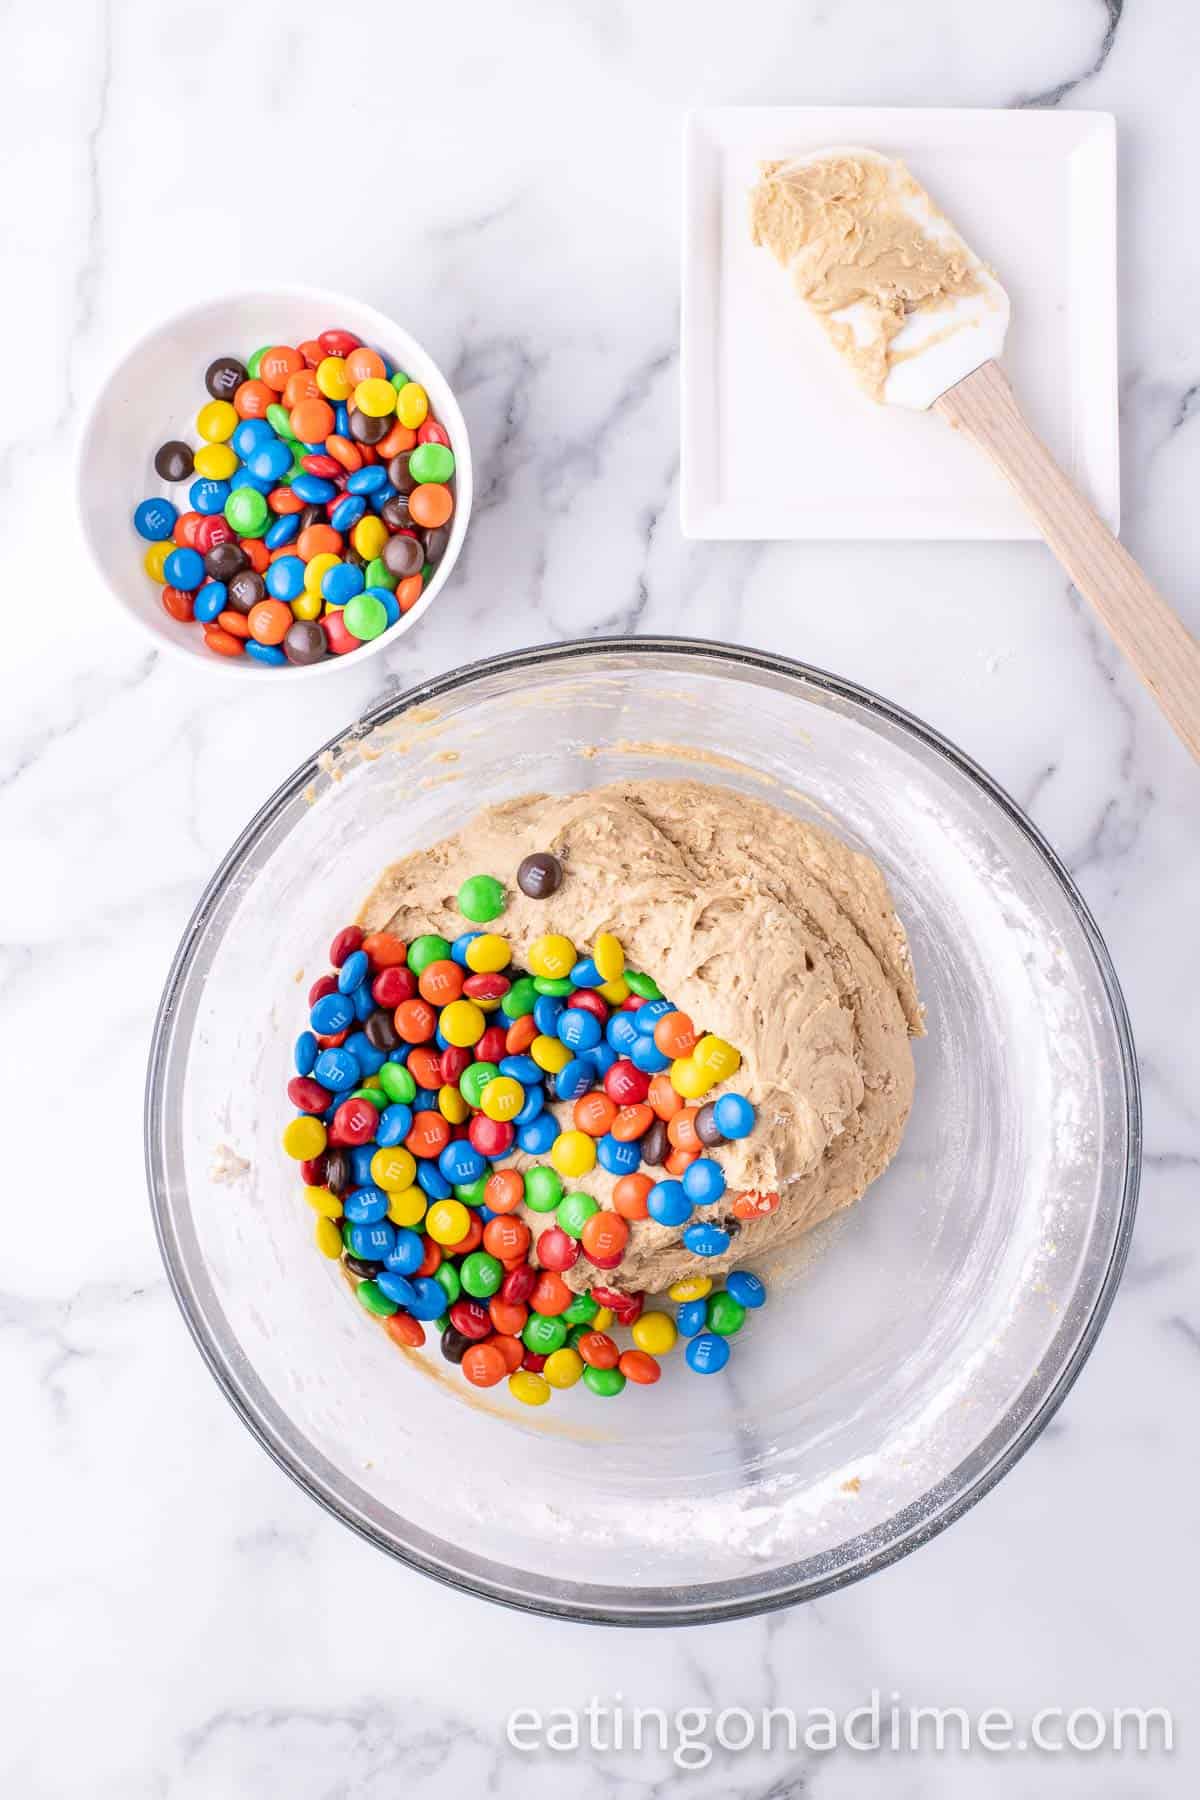 Stir in M&M Candies into the cookie batter in a bowl